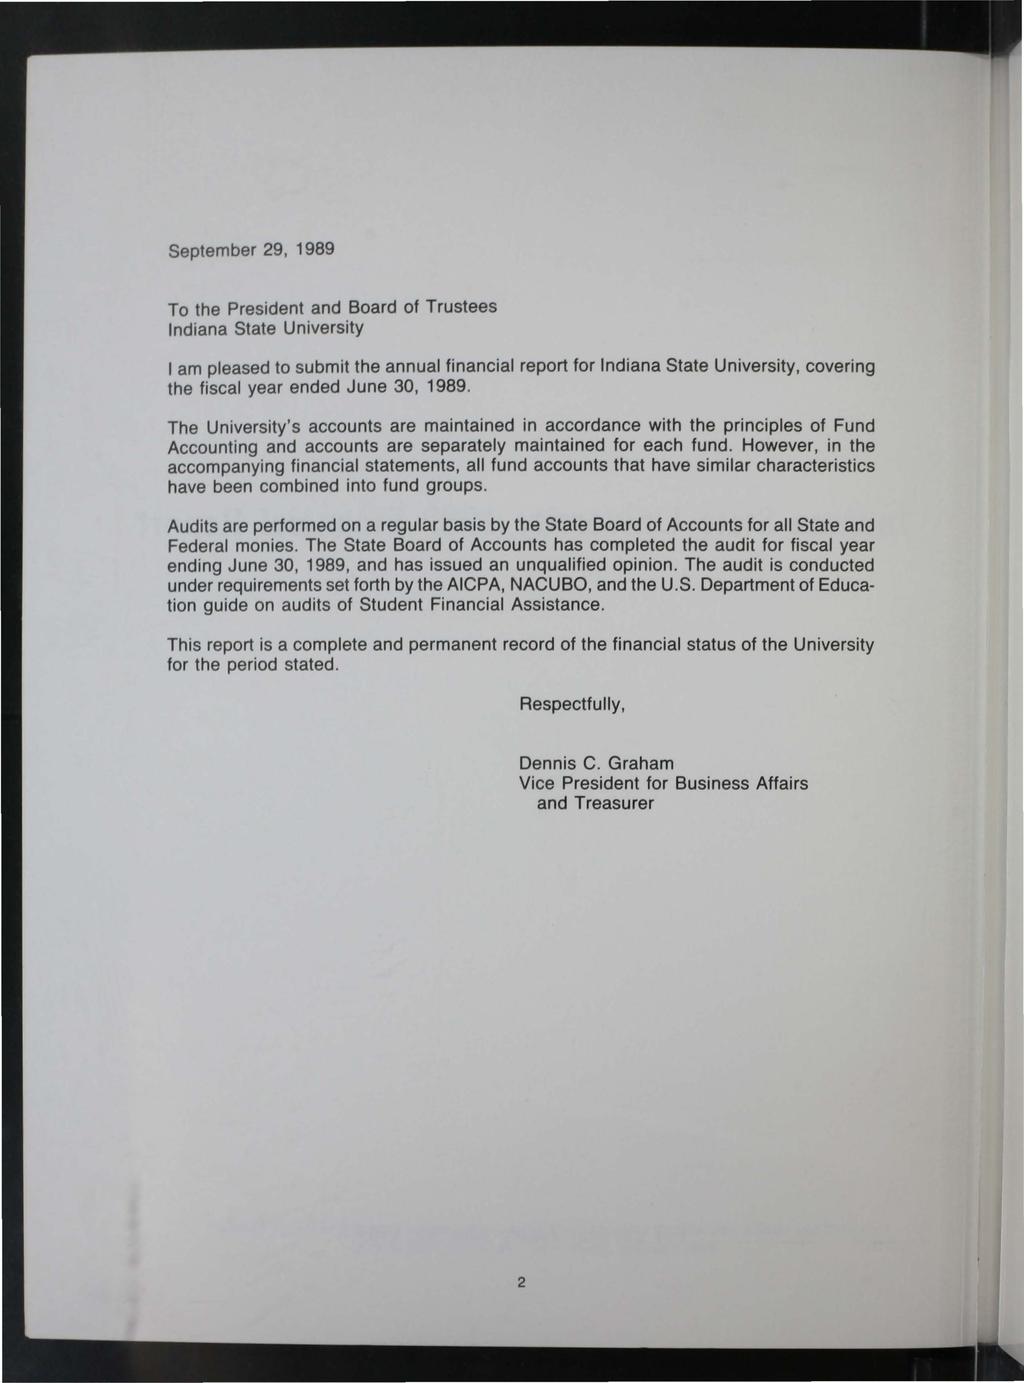 September 29, 1989 To the President and Board of Trustees Indiana State University 1 am pleased to submit the annual financial report for Indiana State University, covering the fiscal year ended June